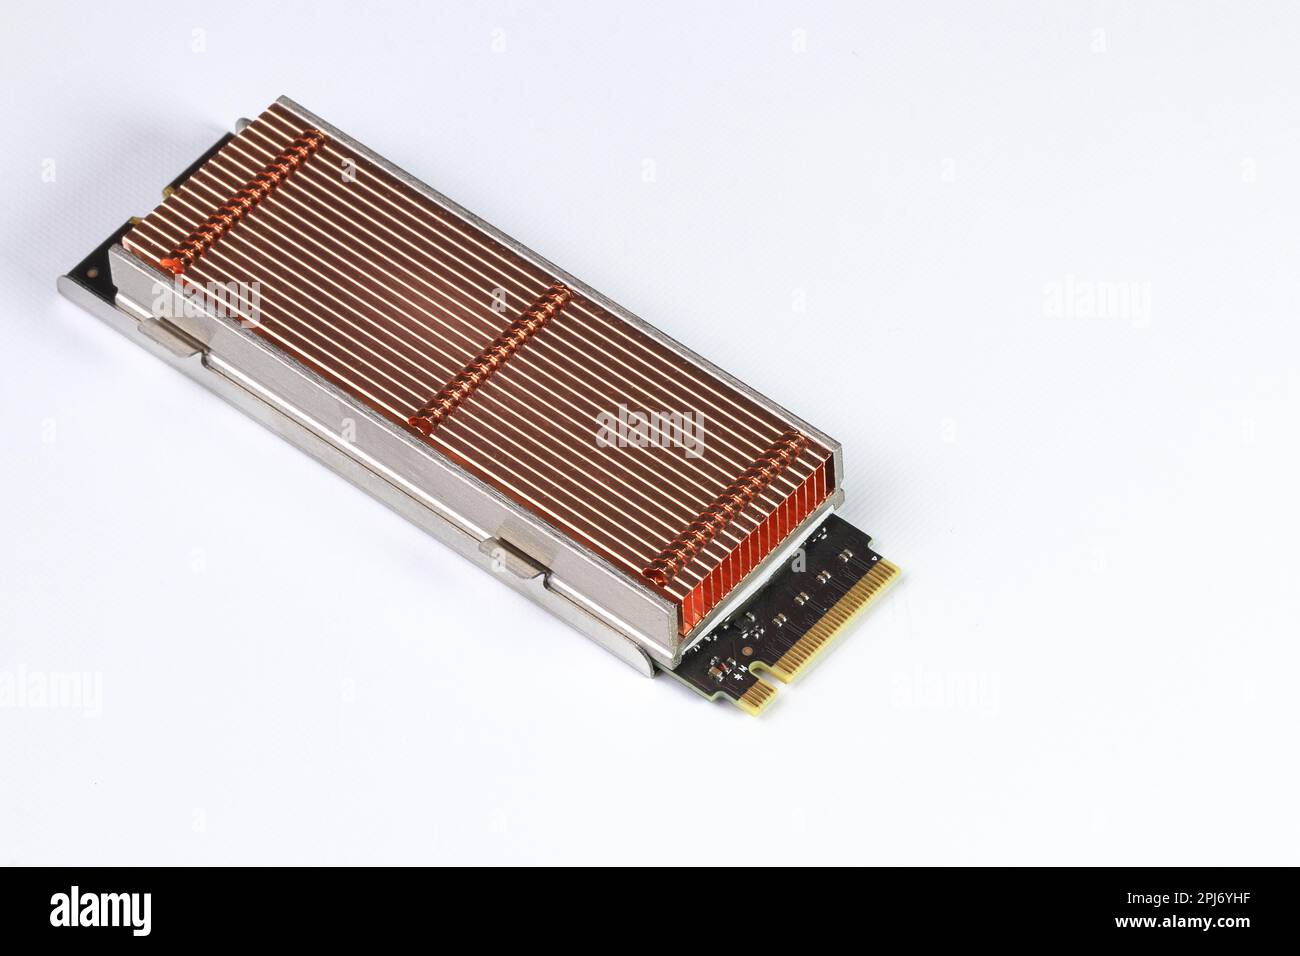 Solid state drives with copper heat sink for computer - ssd sata, NVME PCIe, SATA SSD m key, b key isolated on white background. Stock Photo